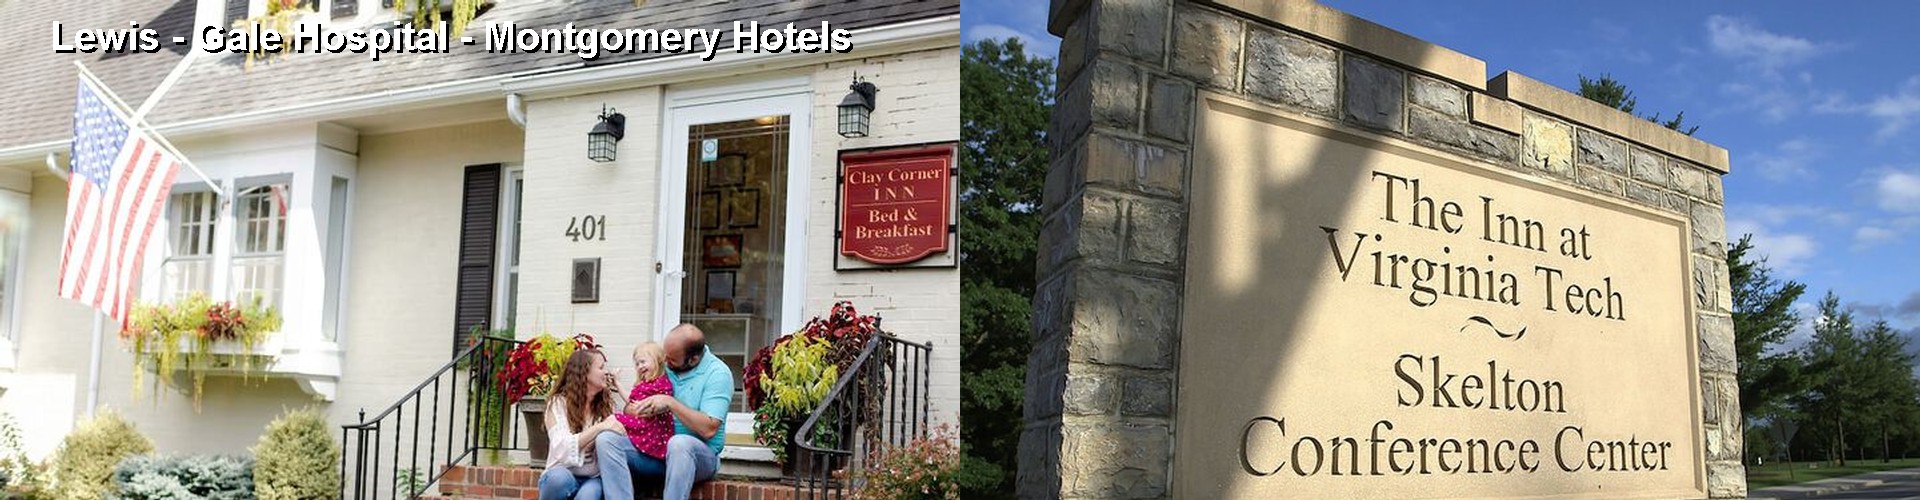 5 Best Hotels near Lewis - Gale Hospital - Montgomery